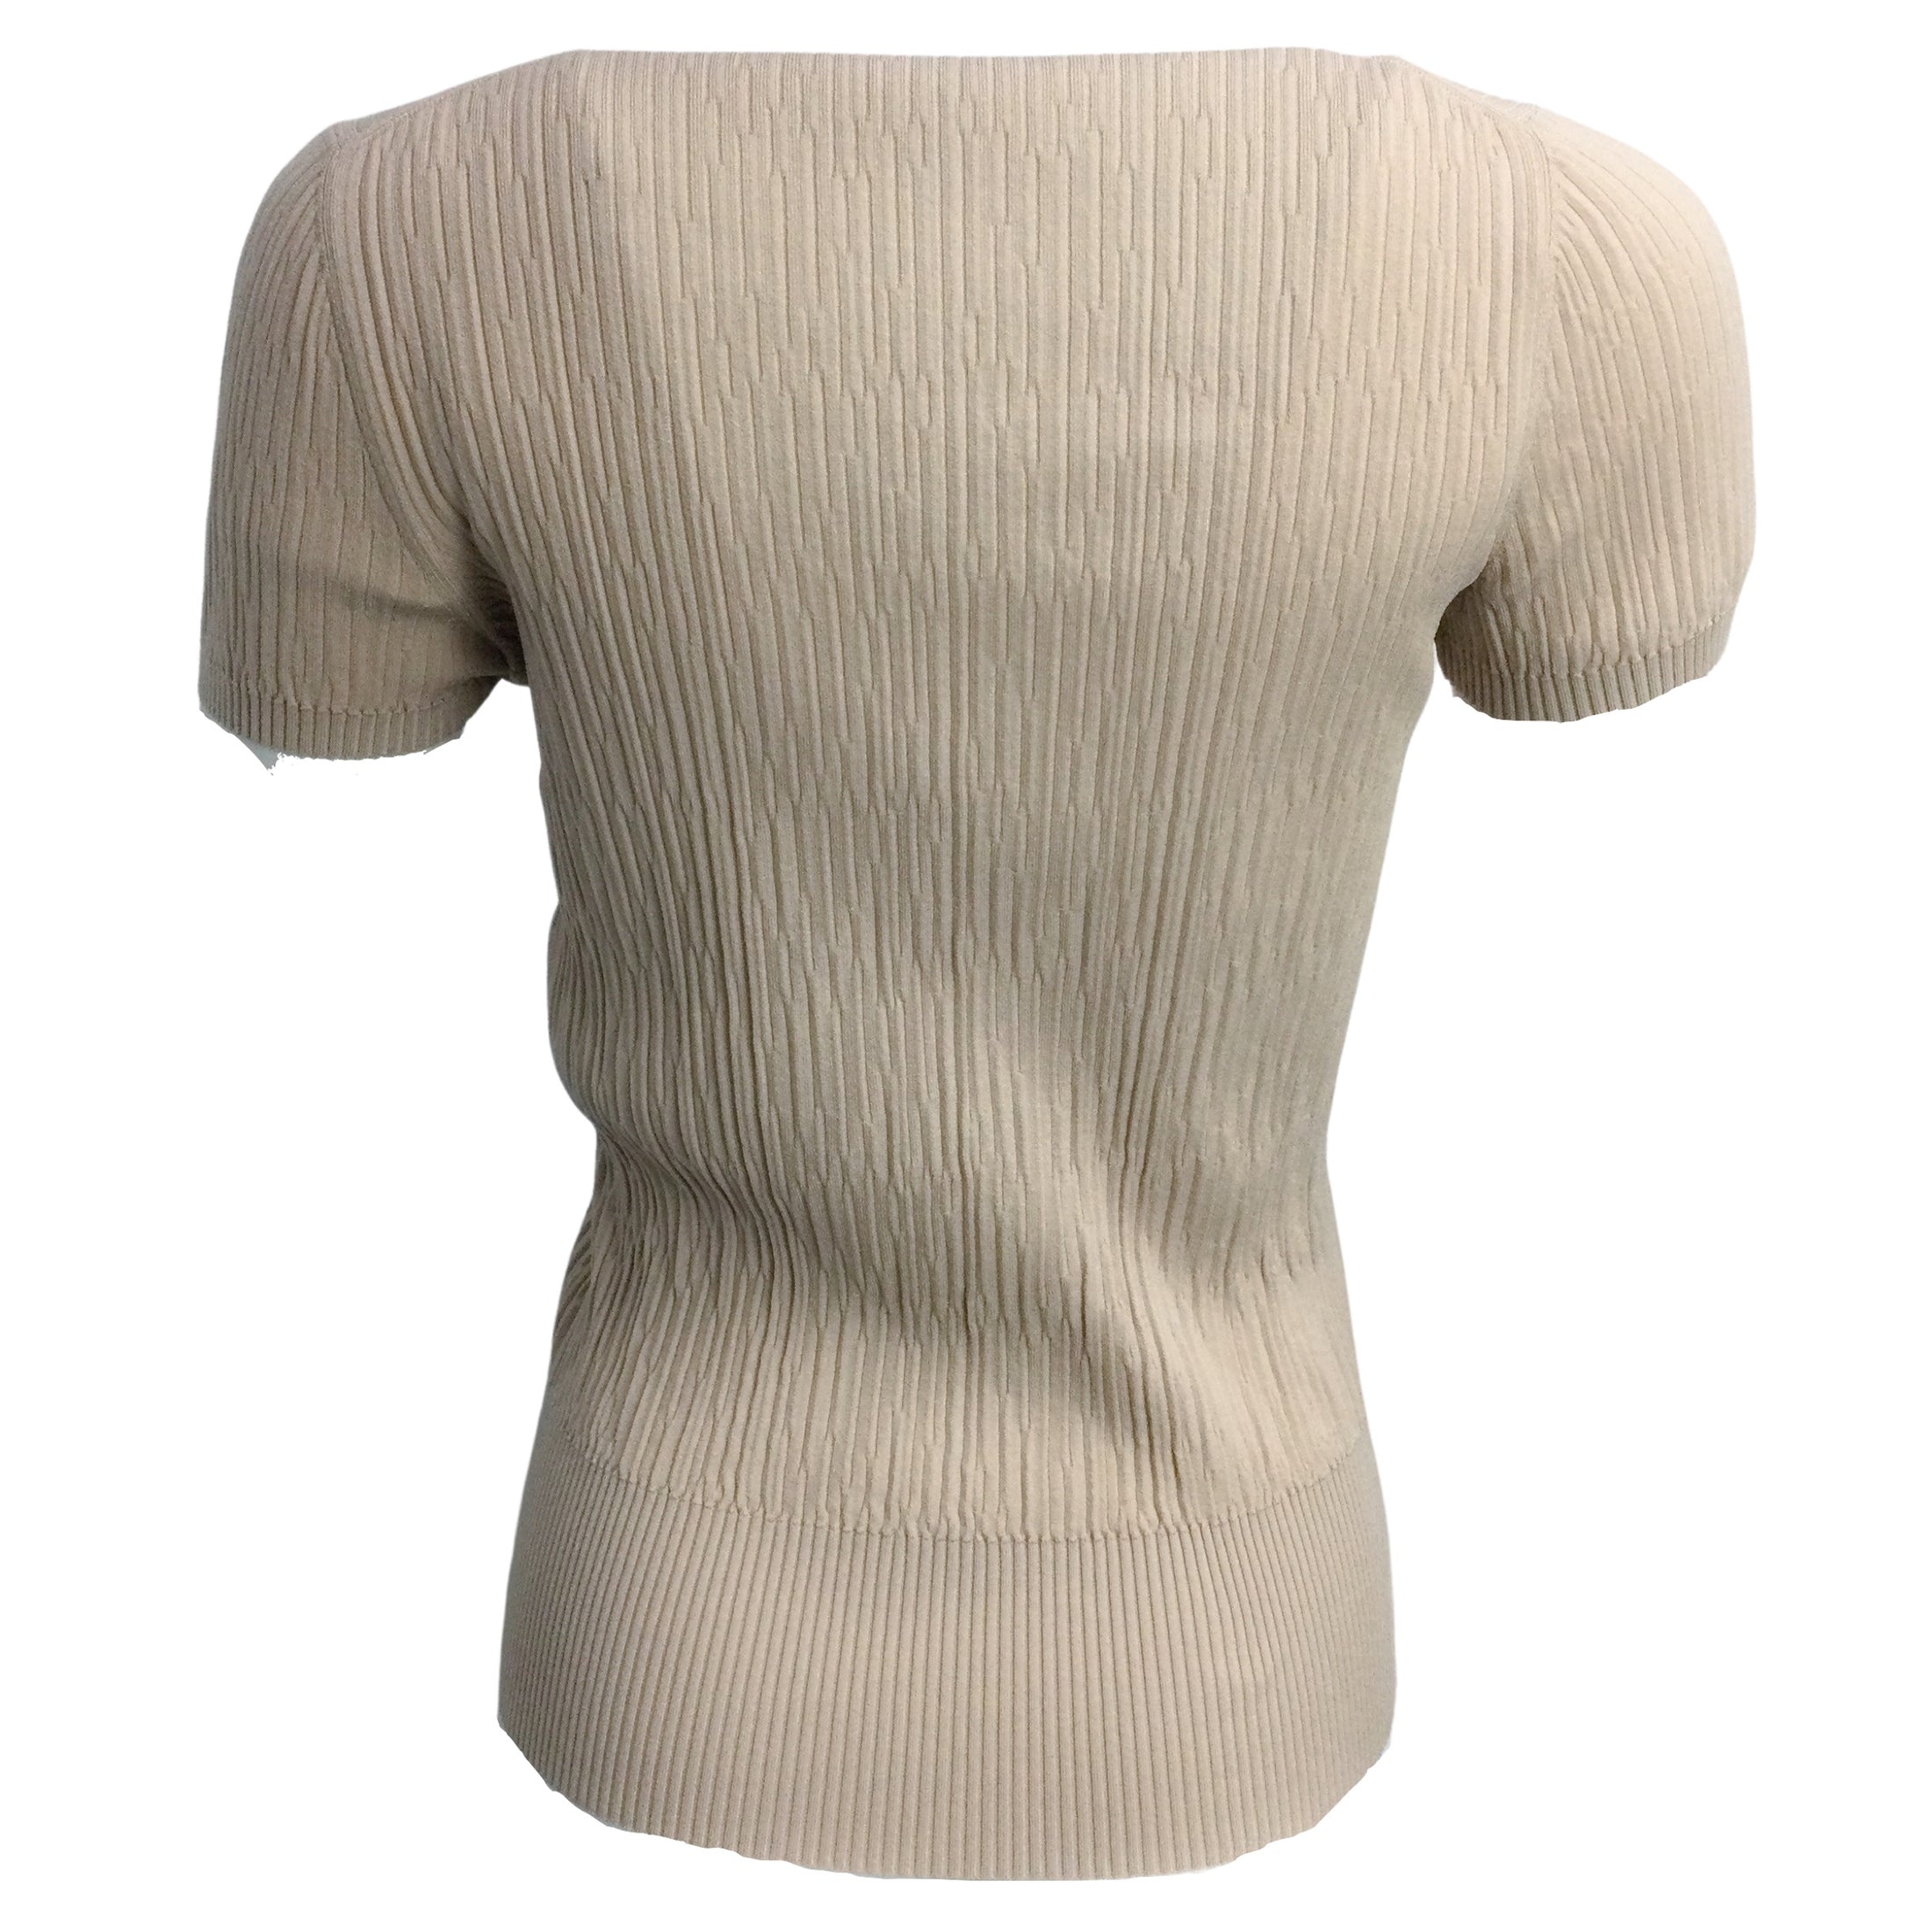 Chanel Tan Short Sleeved Knit Top